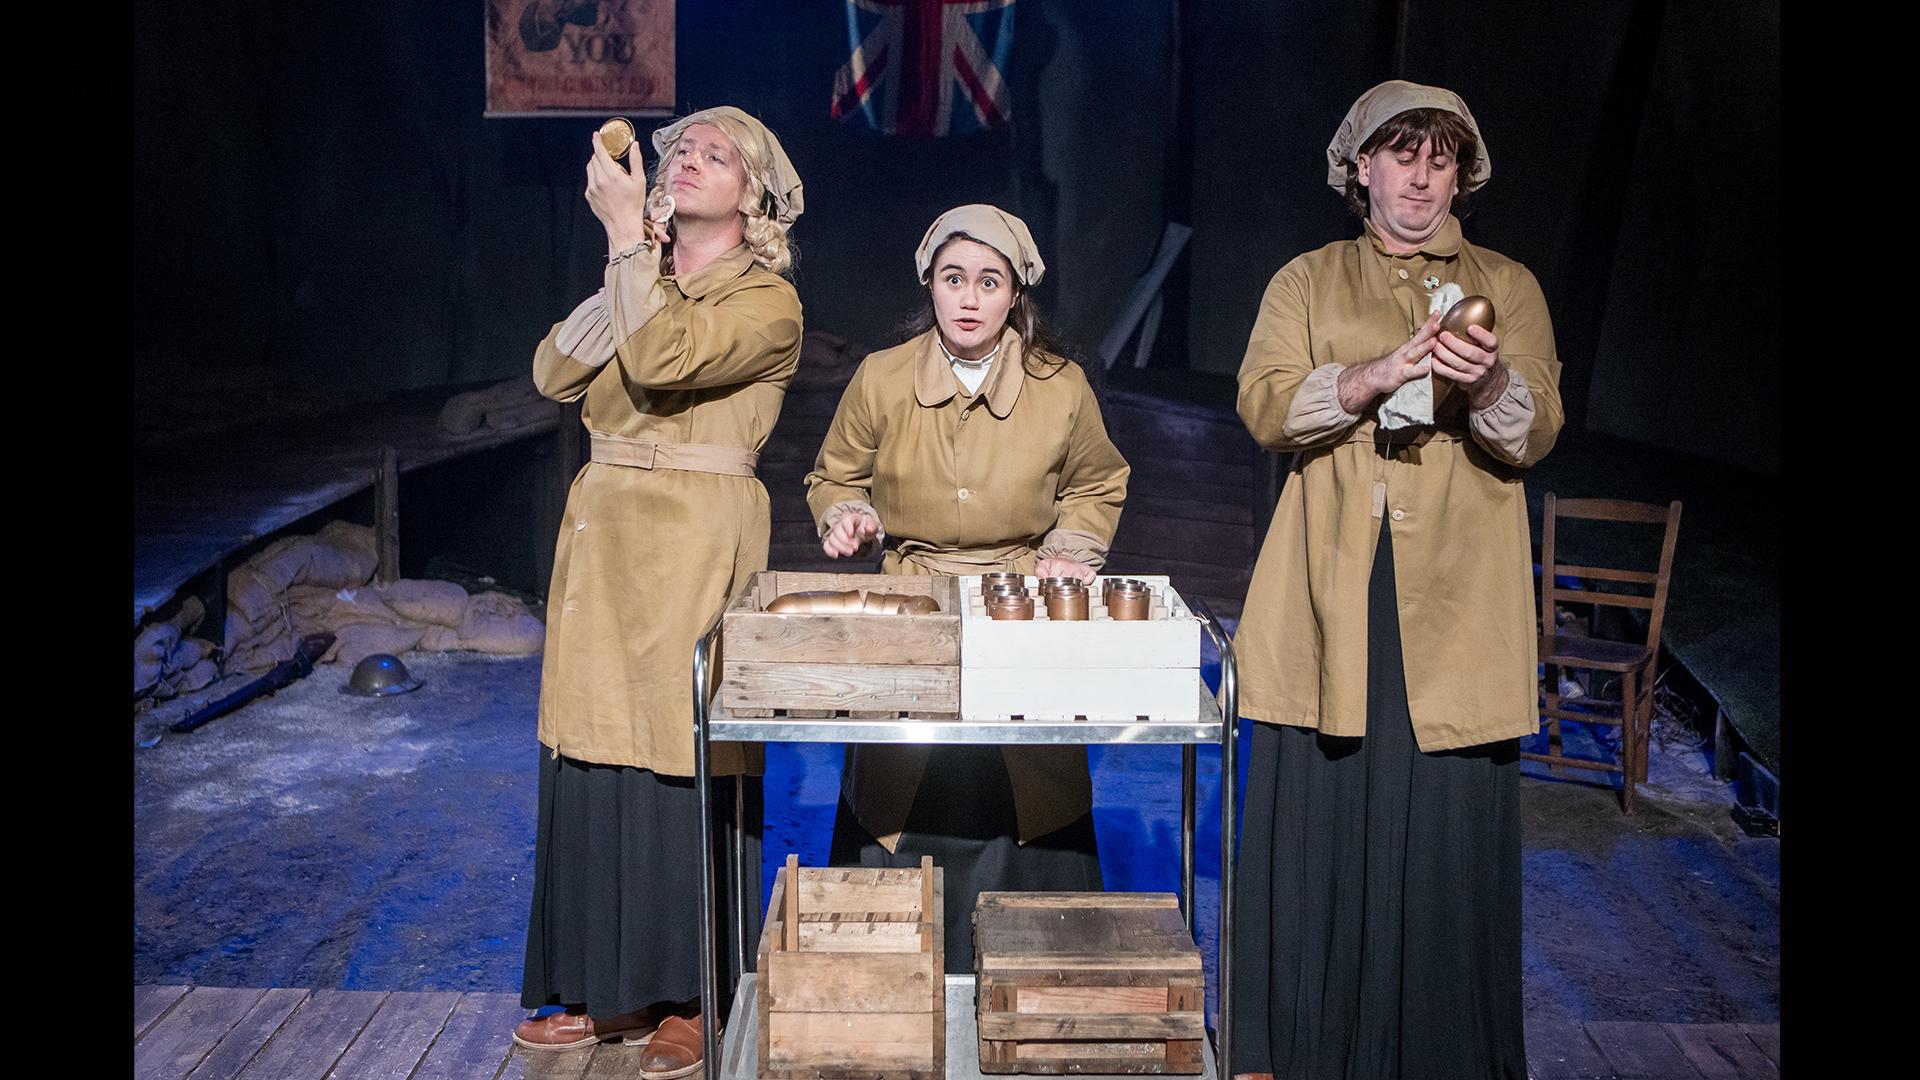 Three actors, one woman, two men, dressed as female munition factory workers